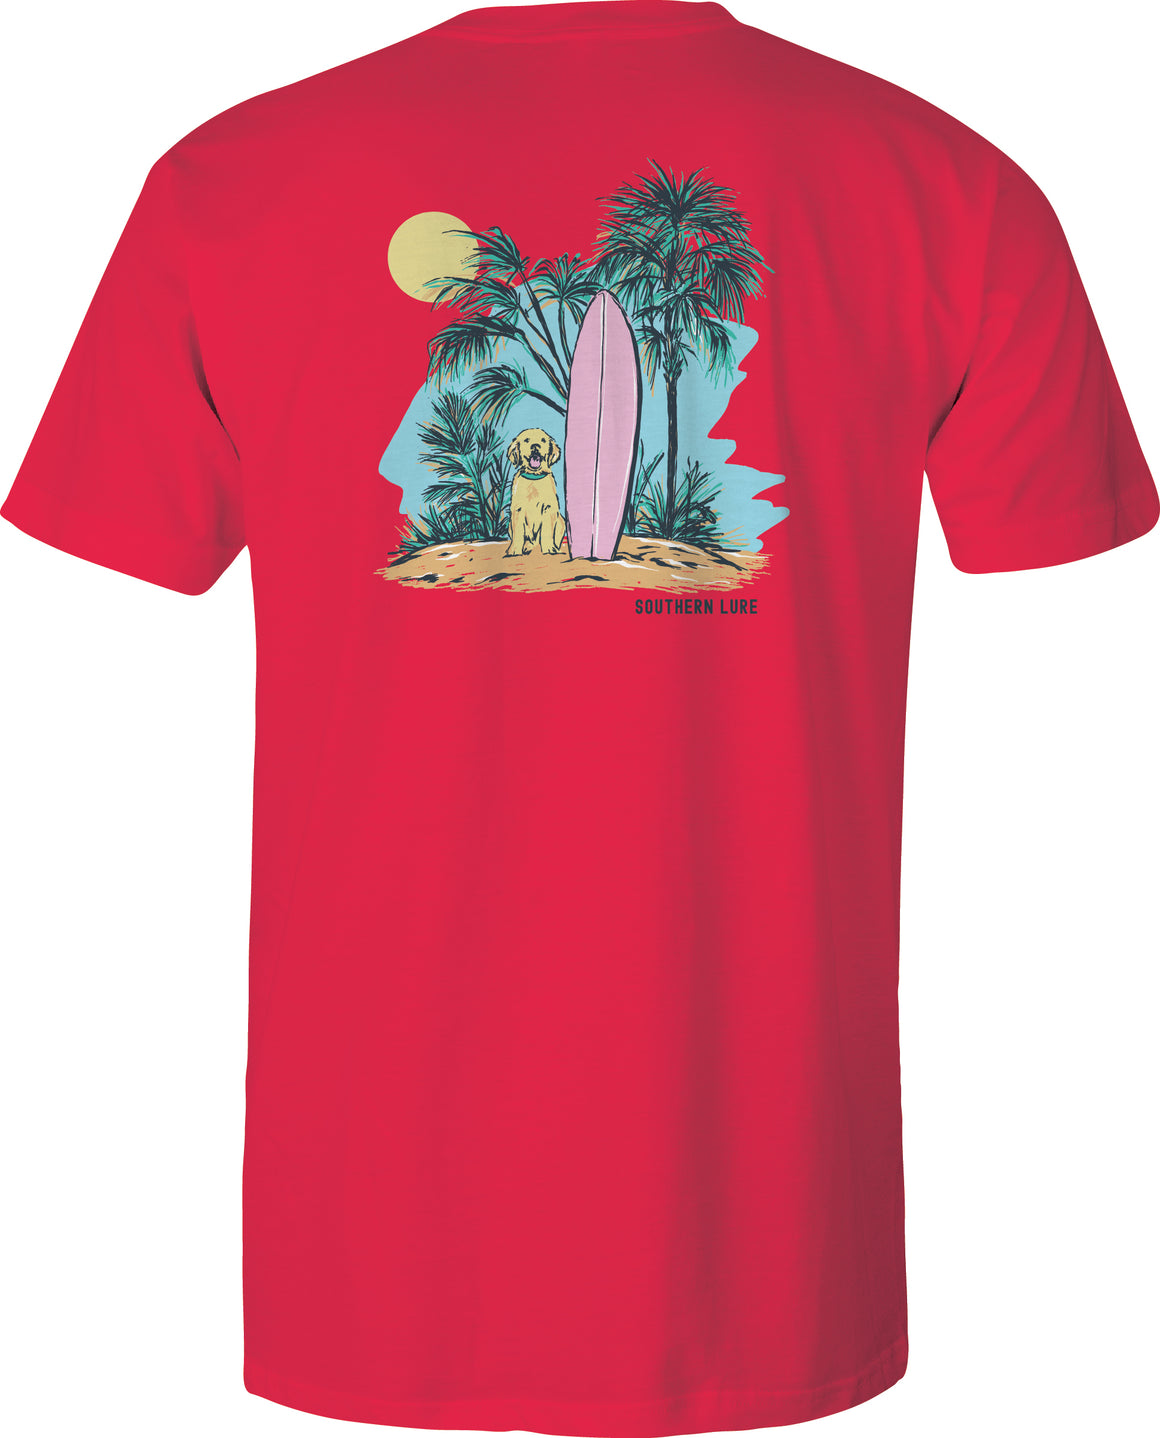 Youth & Toddler Short Sleeve Tee Surf Pup - Coral